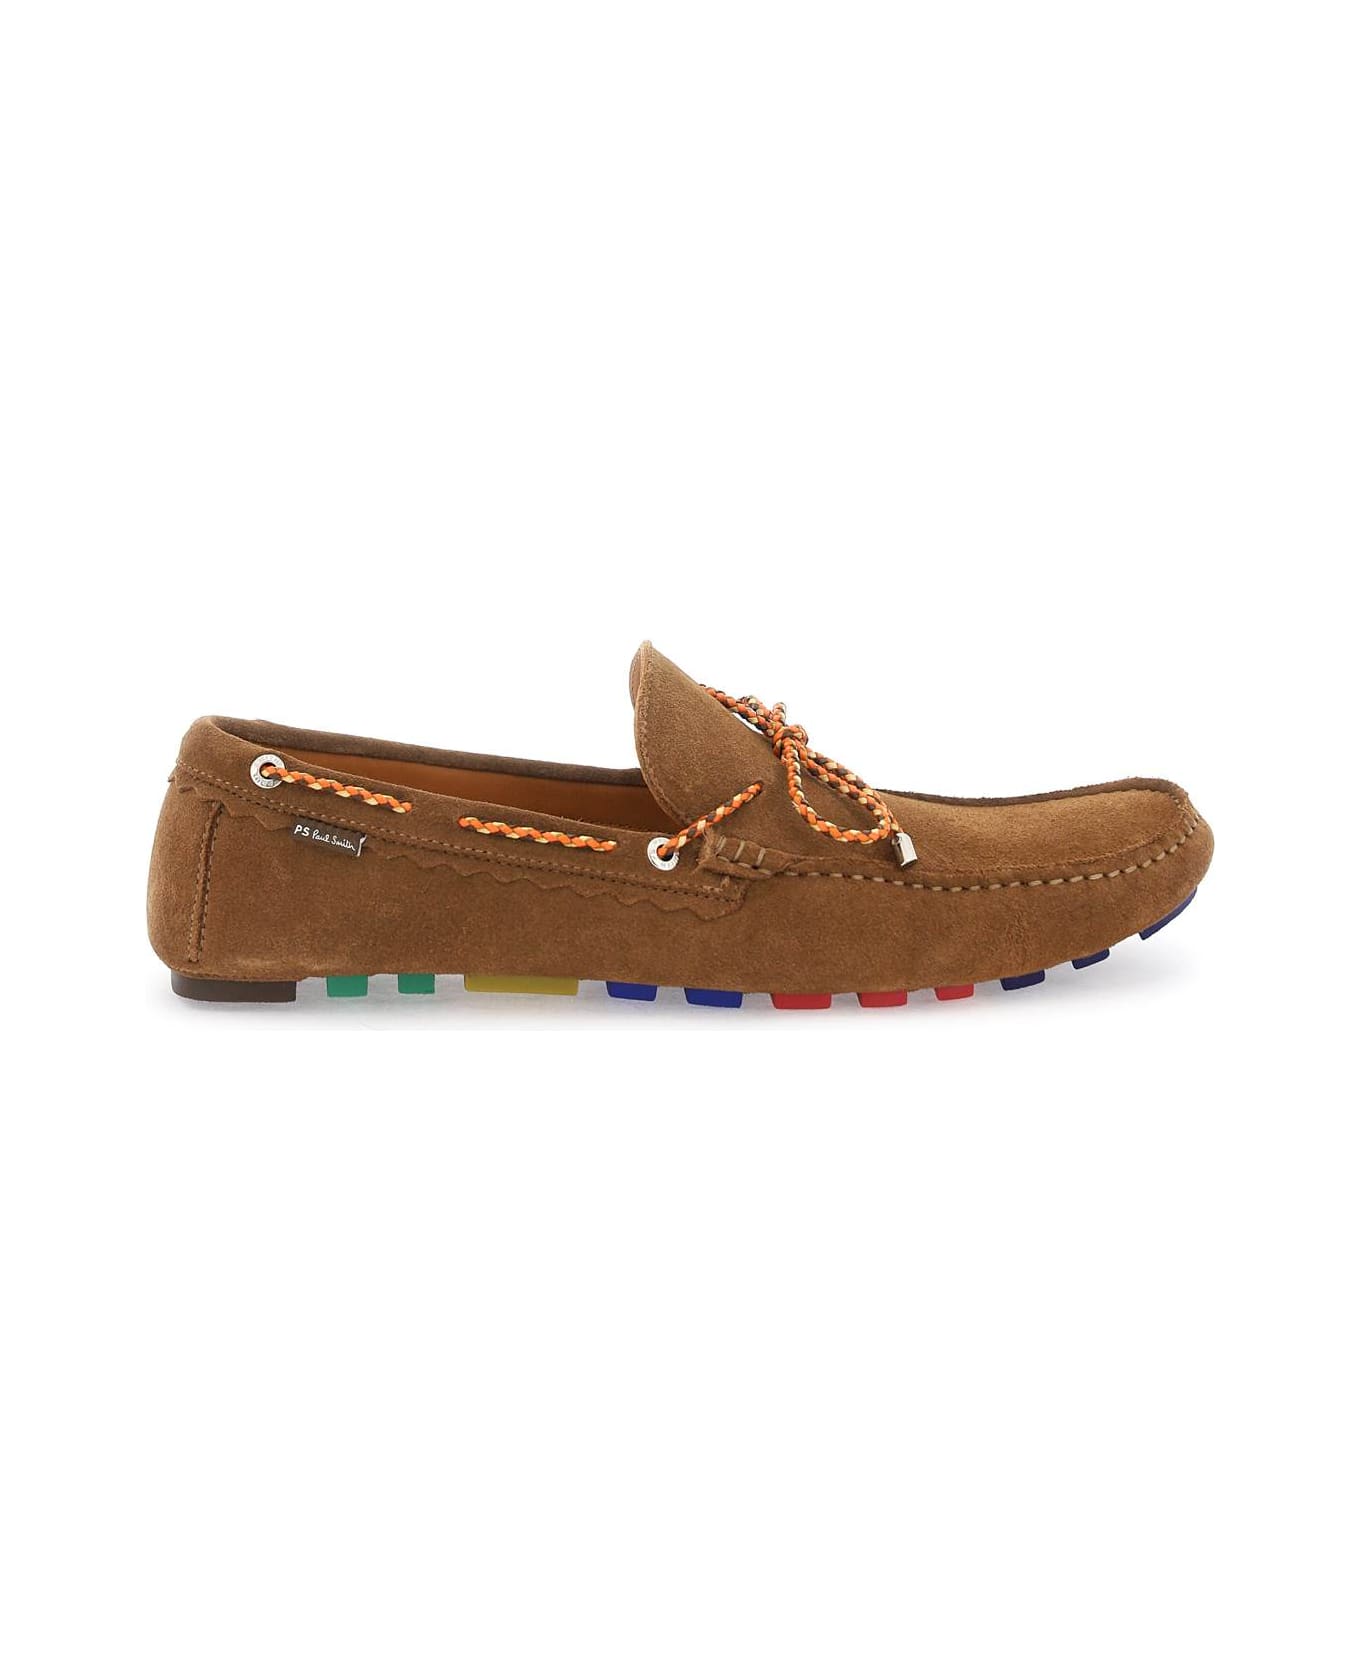 PS by Paul Smith Springfield Suede Loafers - TAN (Brown)